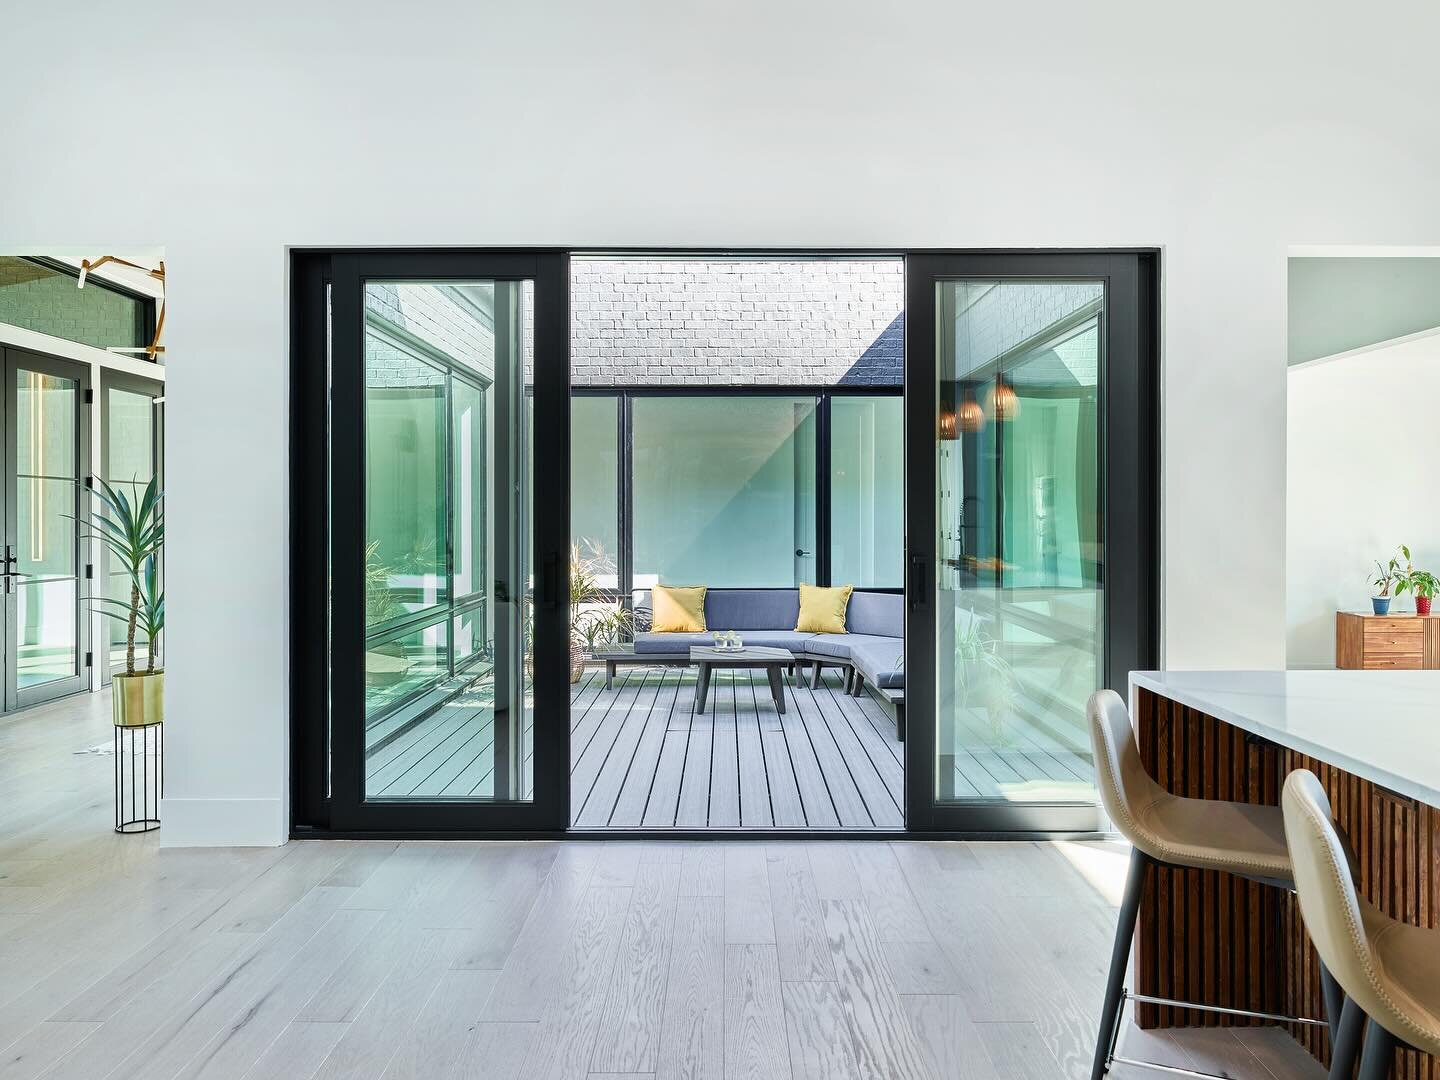 A very unique feature of this home: an interior / exterior courtyard. @surfacearchitecture 
#modern #home #residential #interiors #interiordesign #architecture #architecturephotography